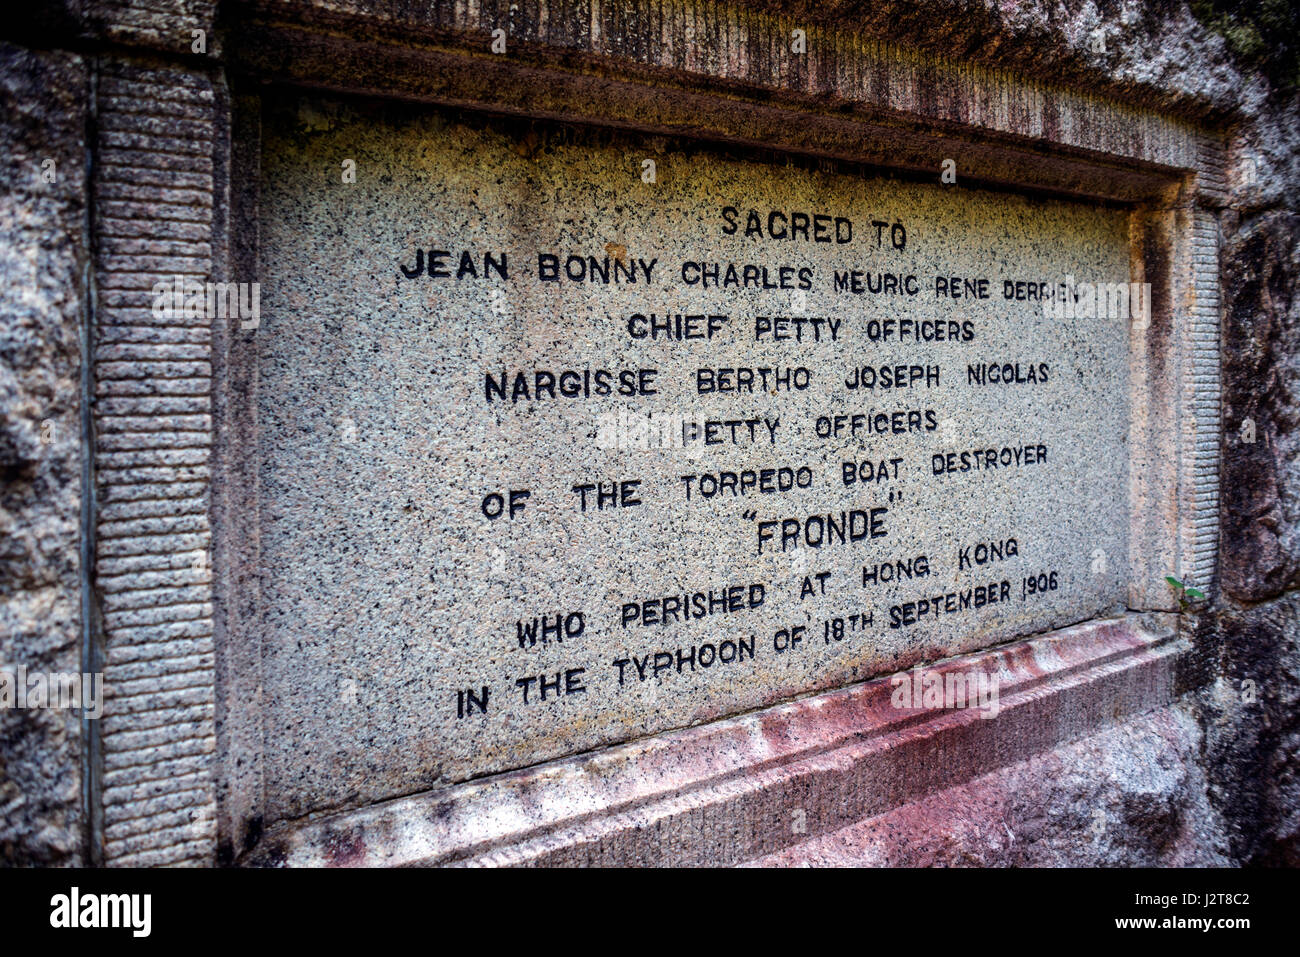 Memorial to Petty Officers and Chief Petty Officers who died in the torpedo boat destroyer 'Fronde', 1906, Hong Kong Cemetery, Hong Kong Stock Photo